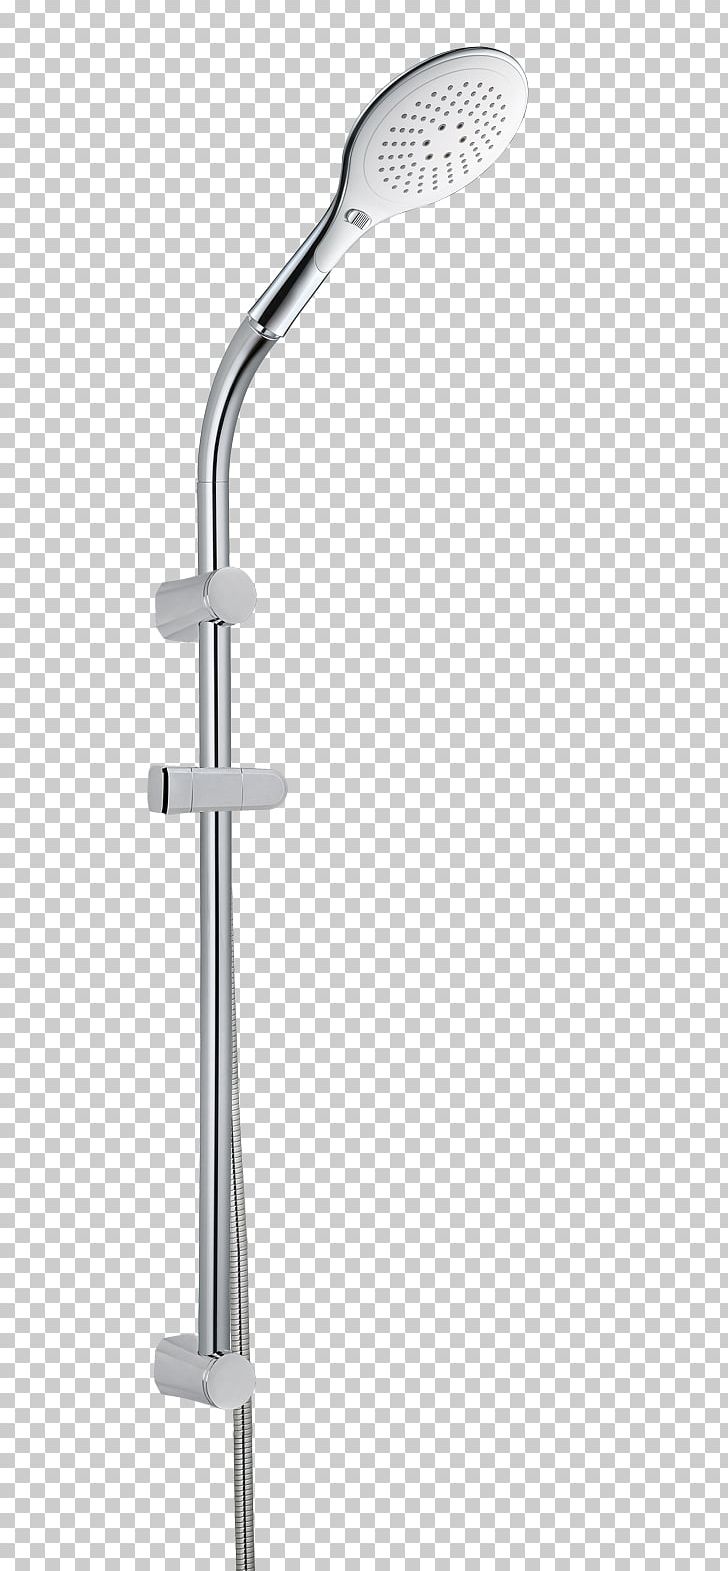 Shower Oralux Plumbing Fixtures Душевая кабина Bathtub Accessory PNG, Clipart, Angle, Bathtub, Bathtub Accessory, Brass, Computer Hardware Free PNG Download